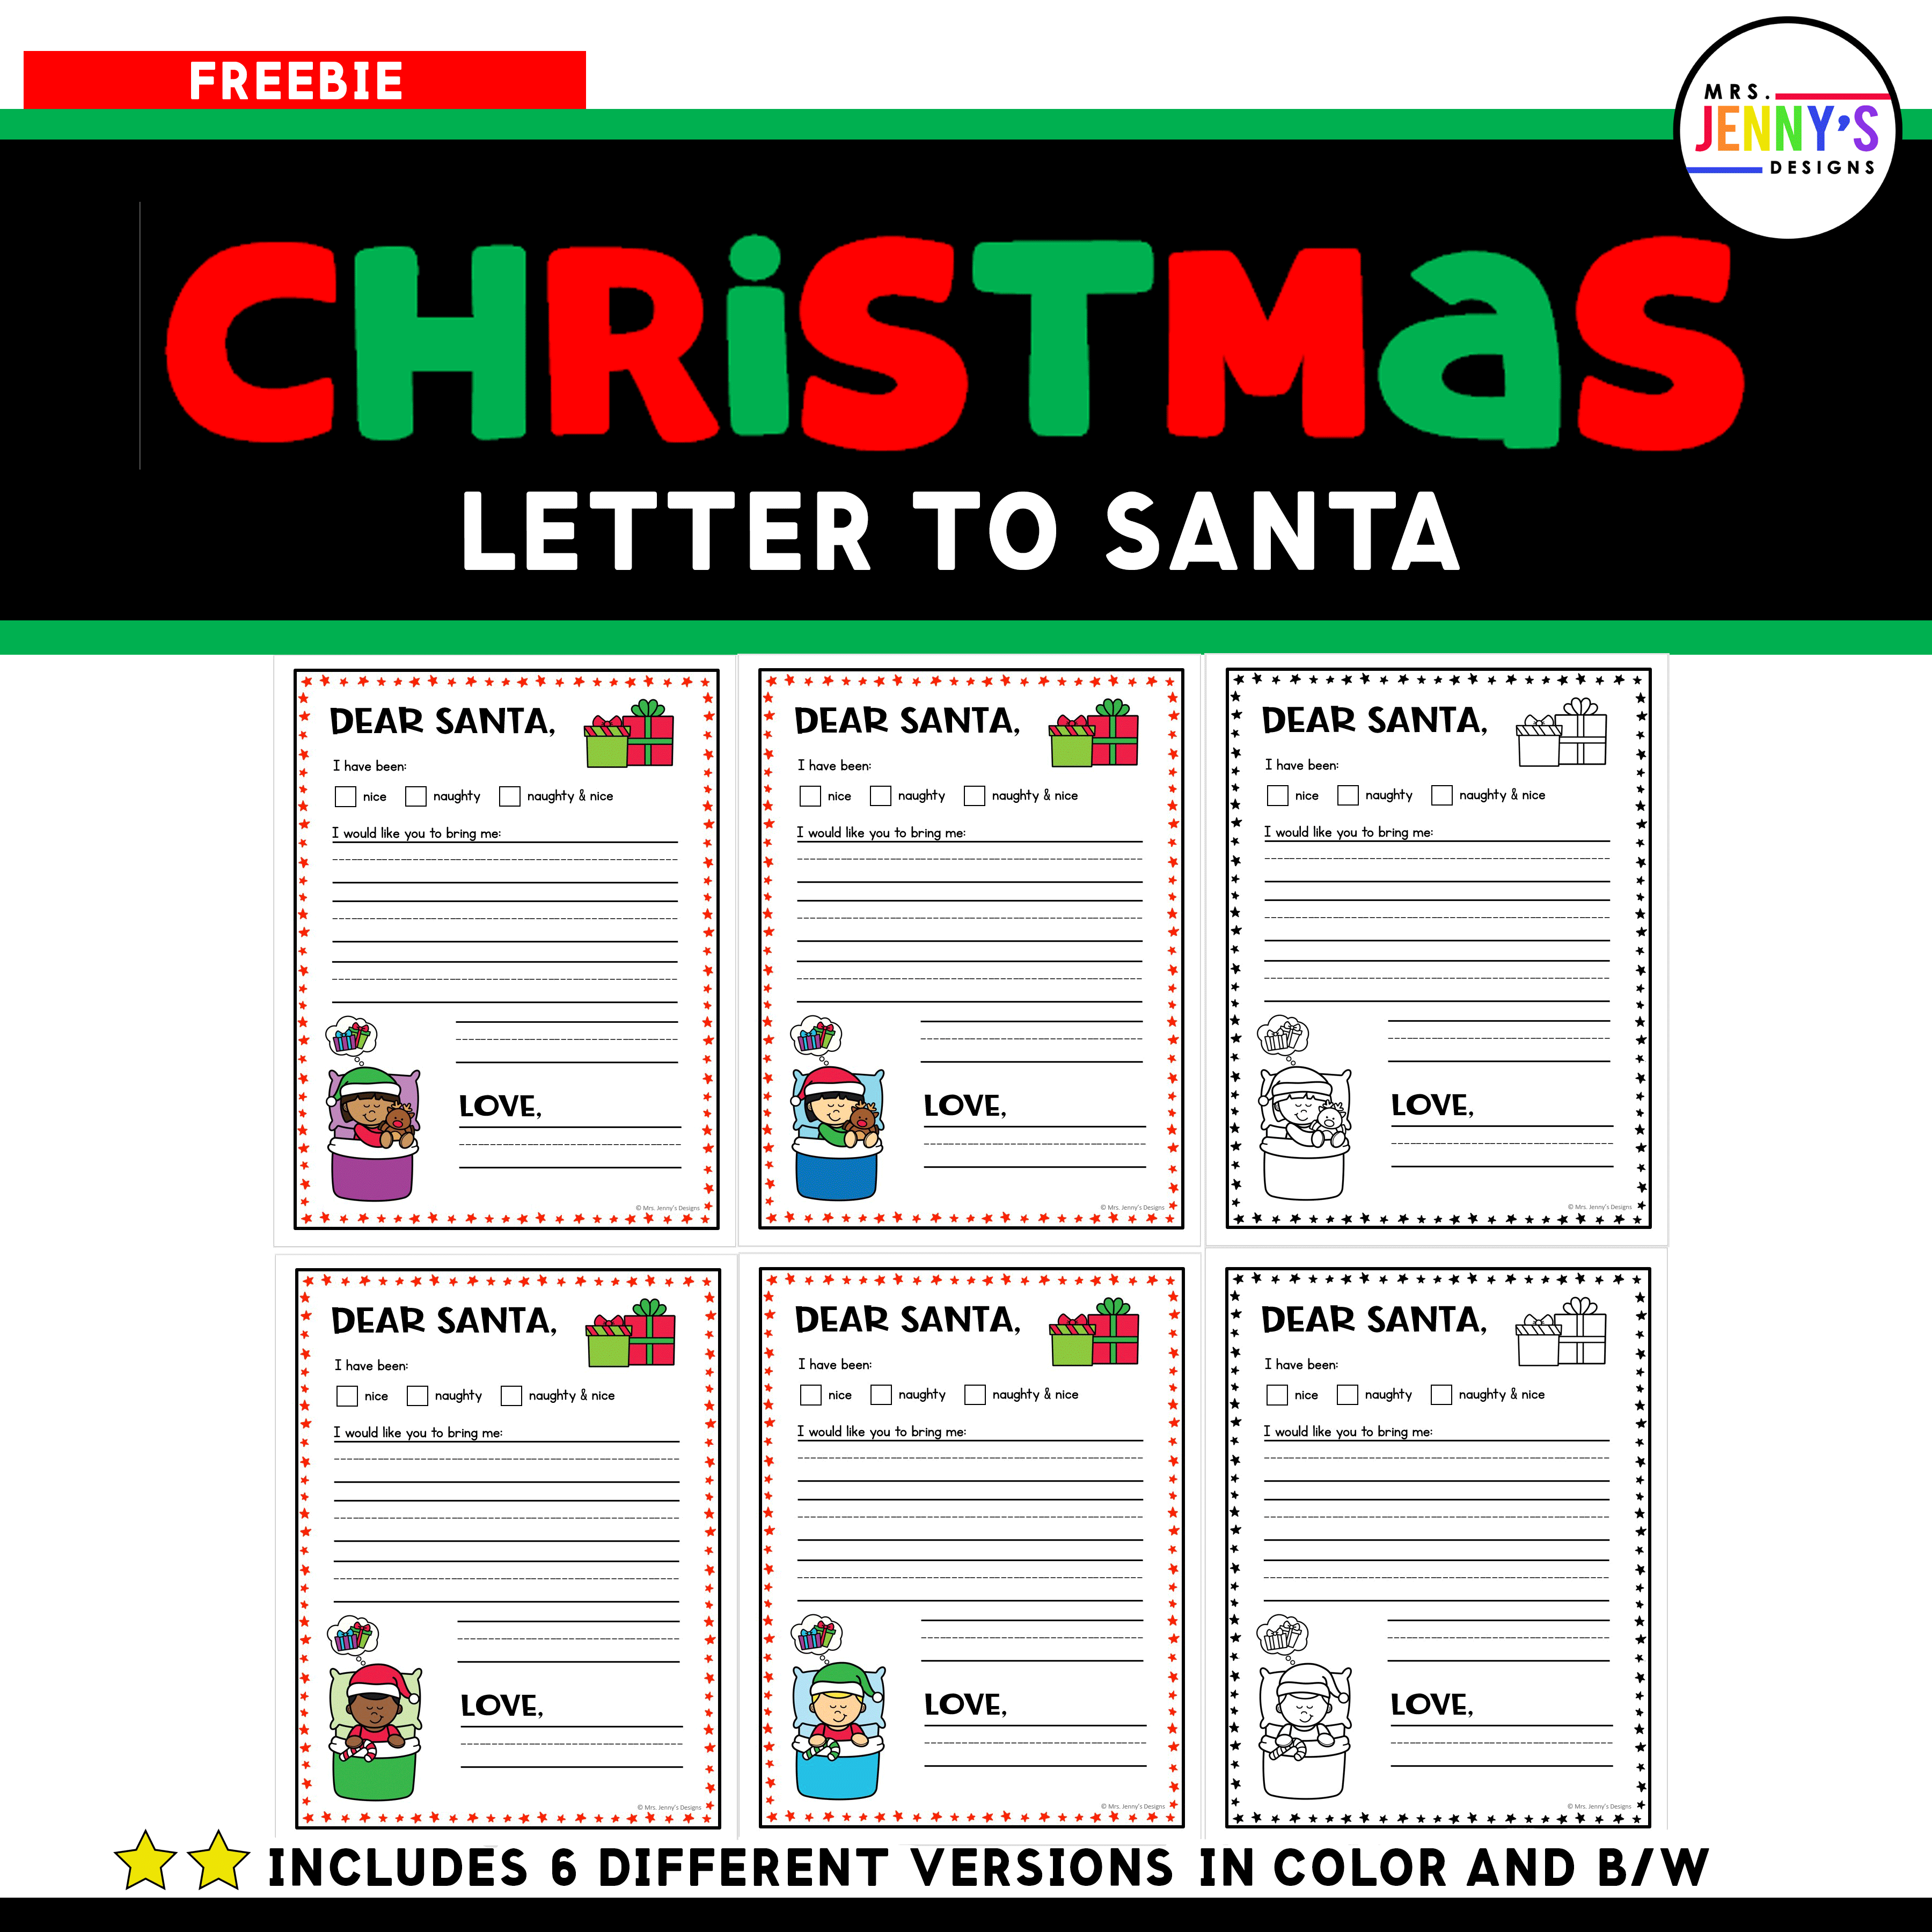 FREE Letter to Santa Template - Color & B/W Version